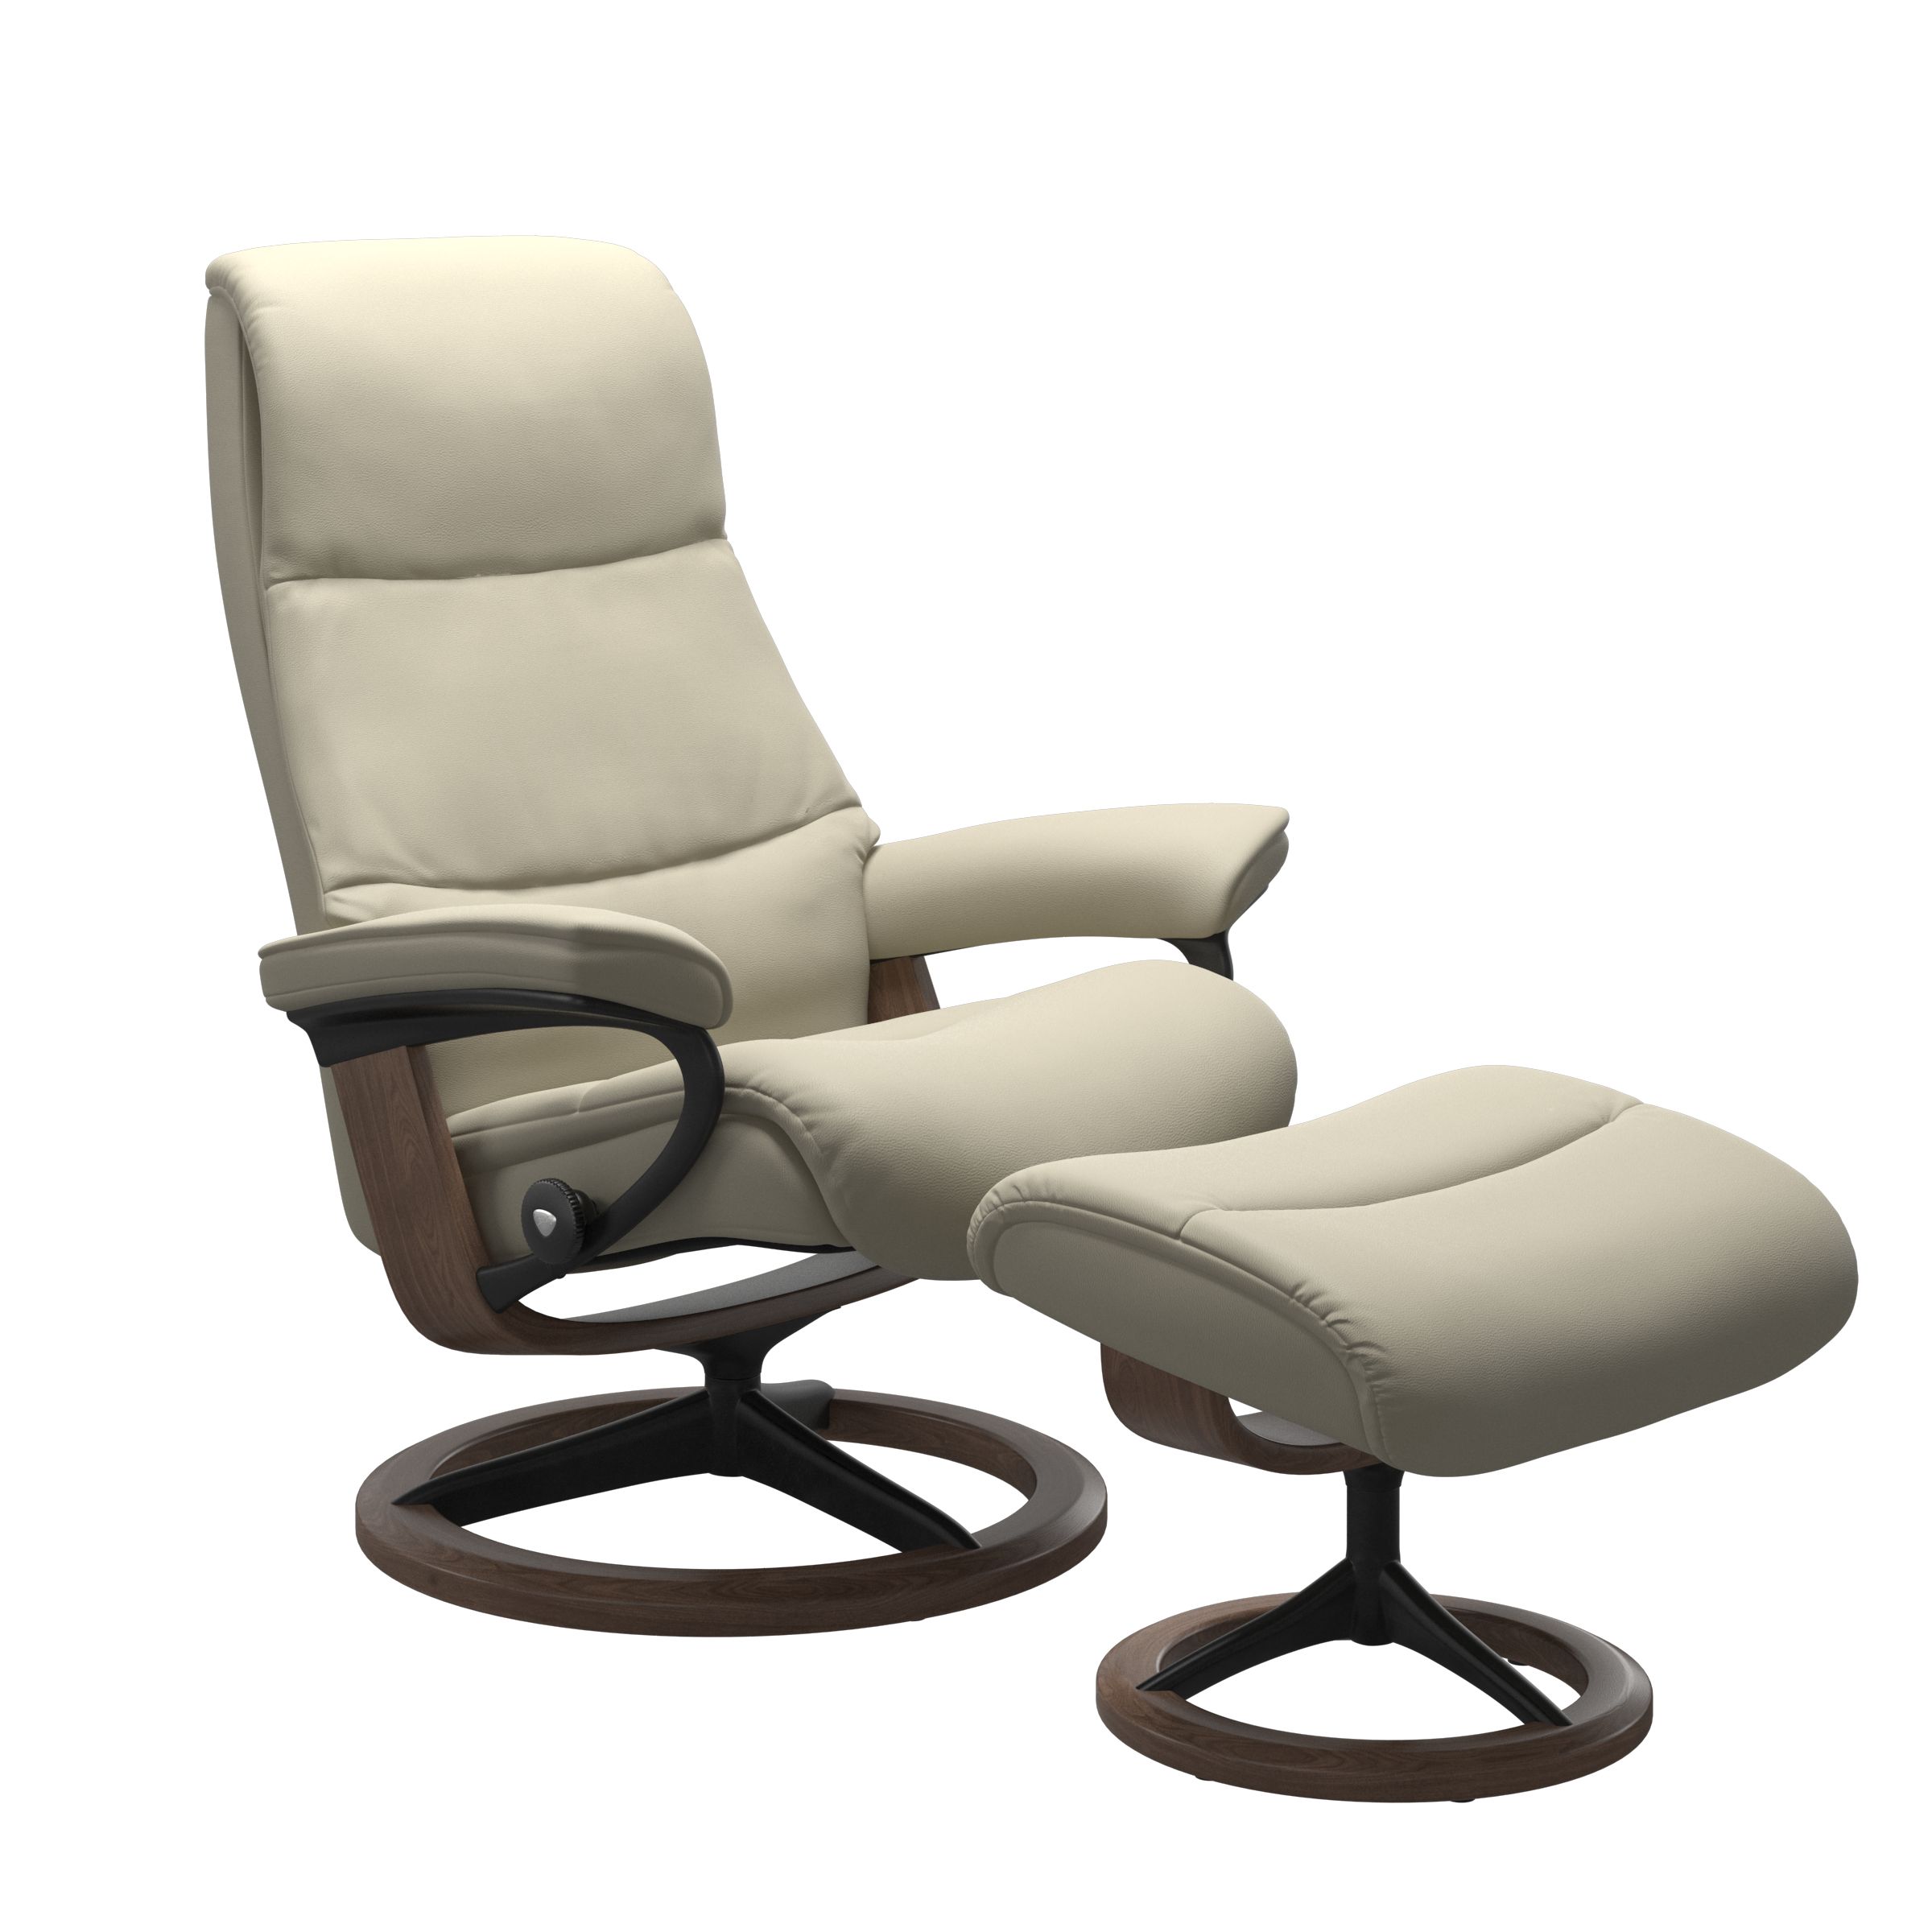 Stressless View Large Recliner and Ottoman with Signature Base